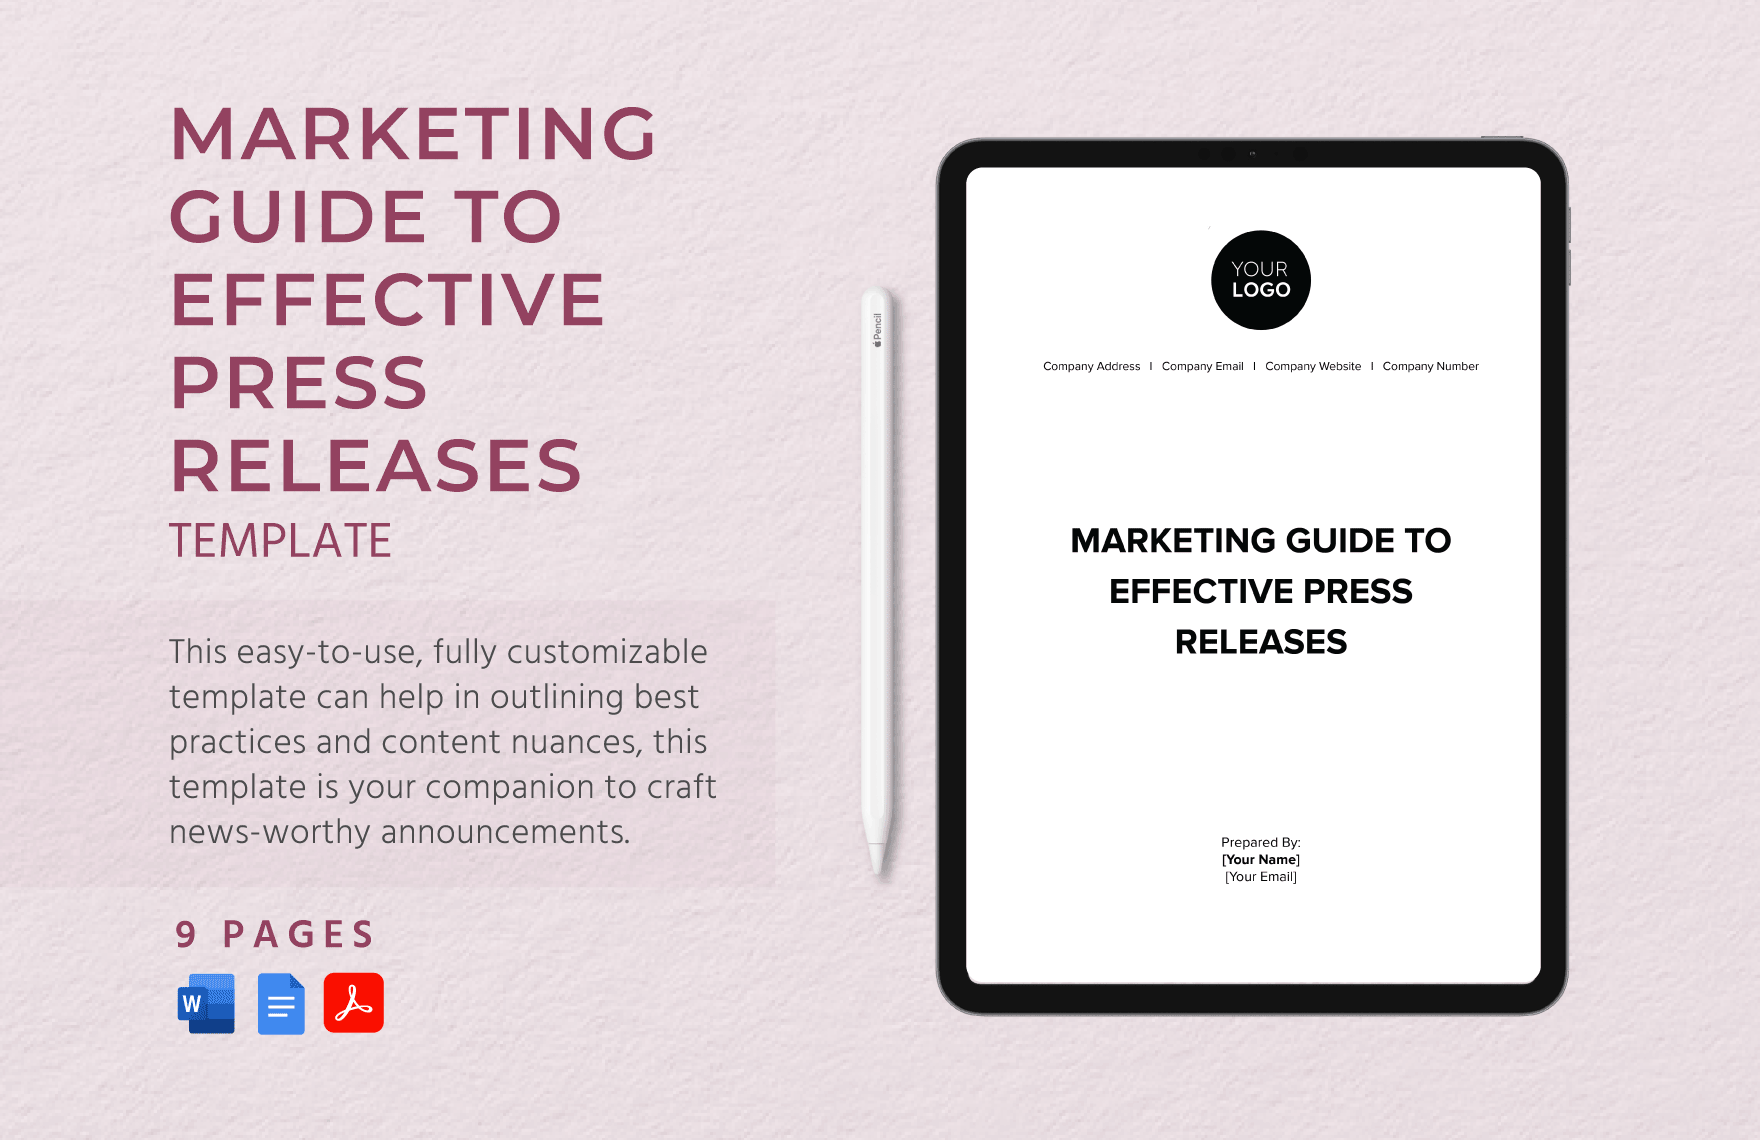 Marketing Guide to Effective Press Releases Template